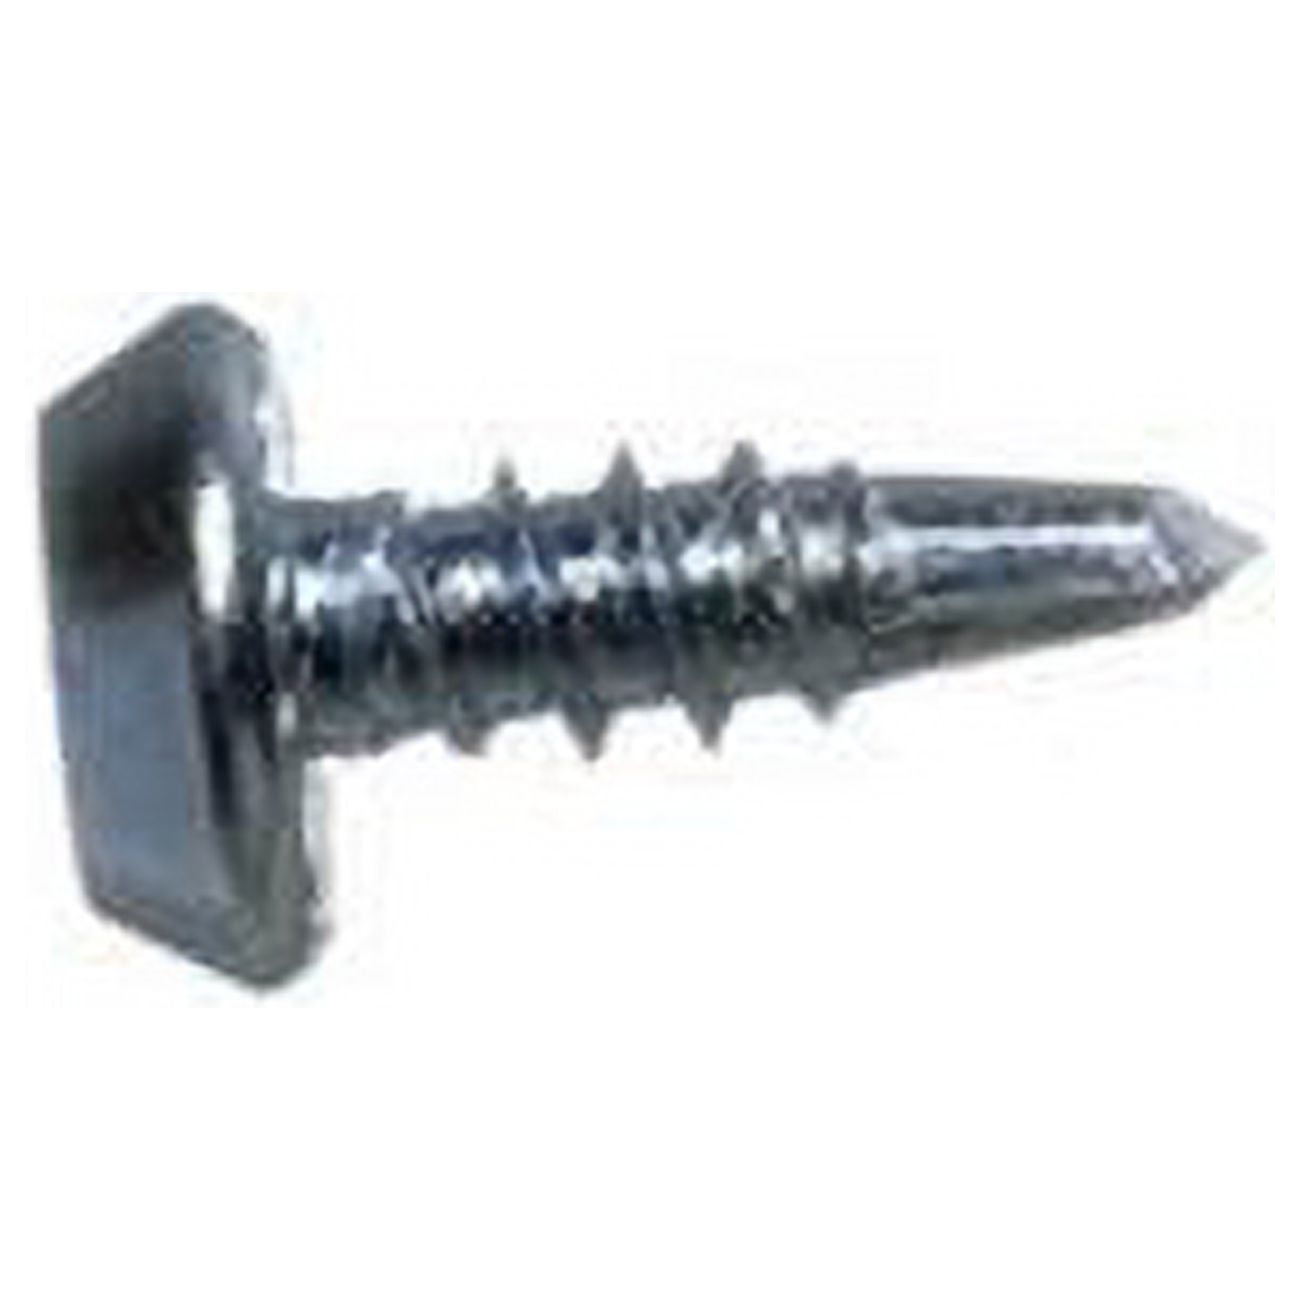 Picture of Grip-Rite 5023928 5 lbs No.7 x 0.43 in. Phillips Pan Screws - Pack of 6